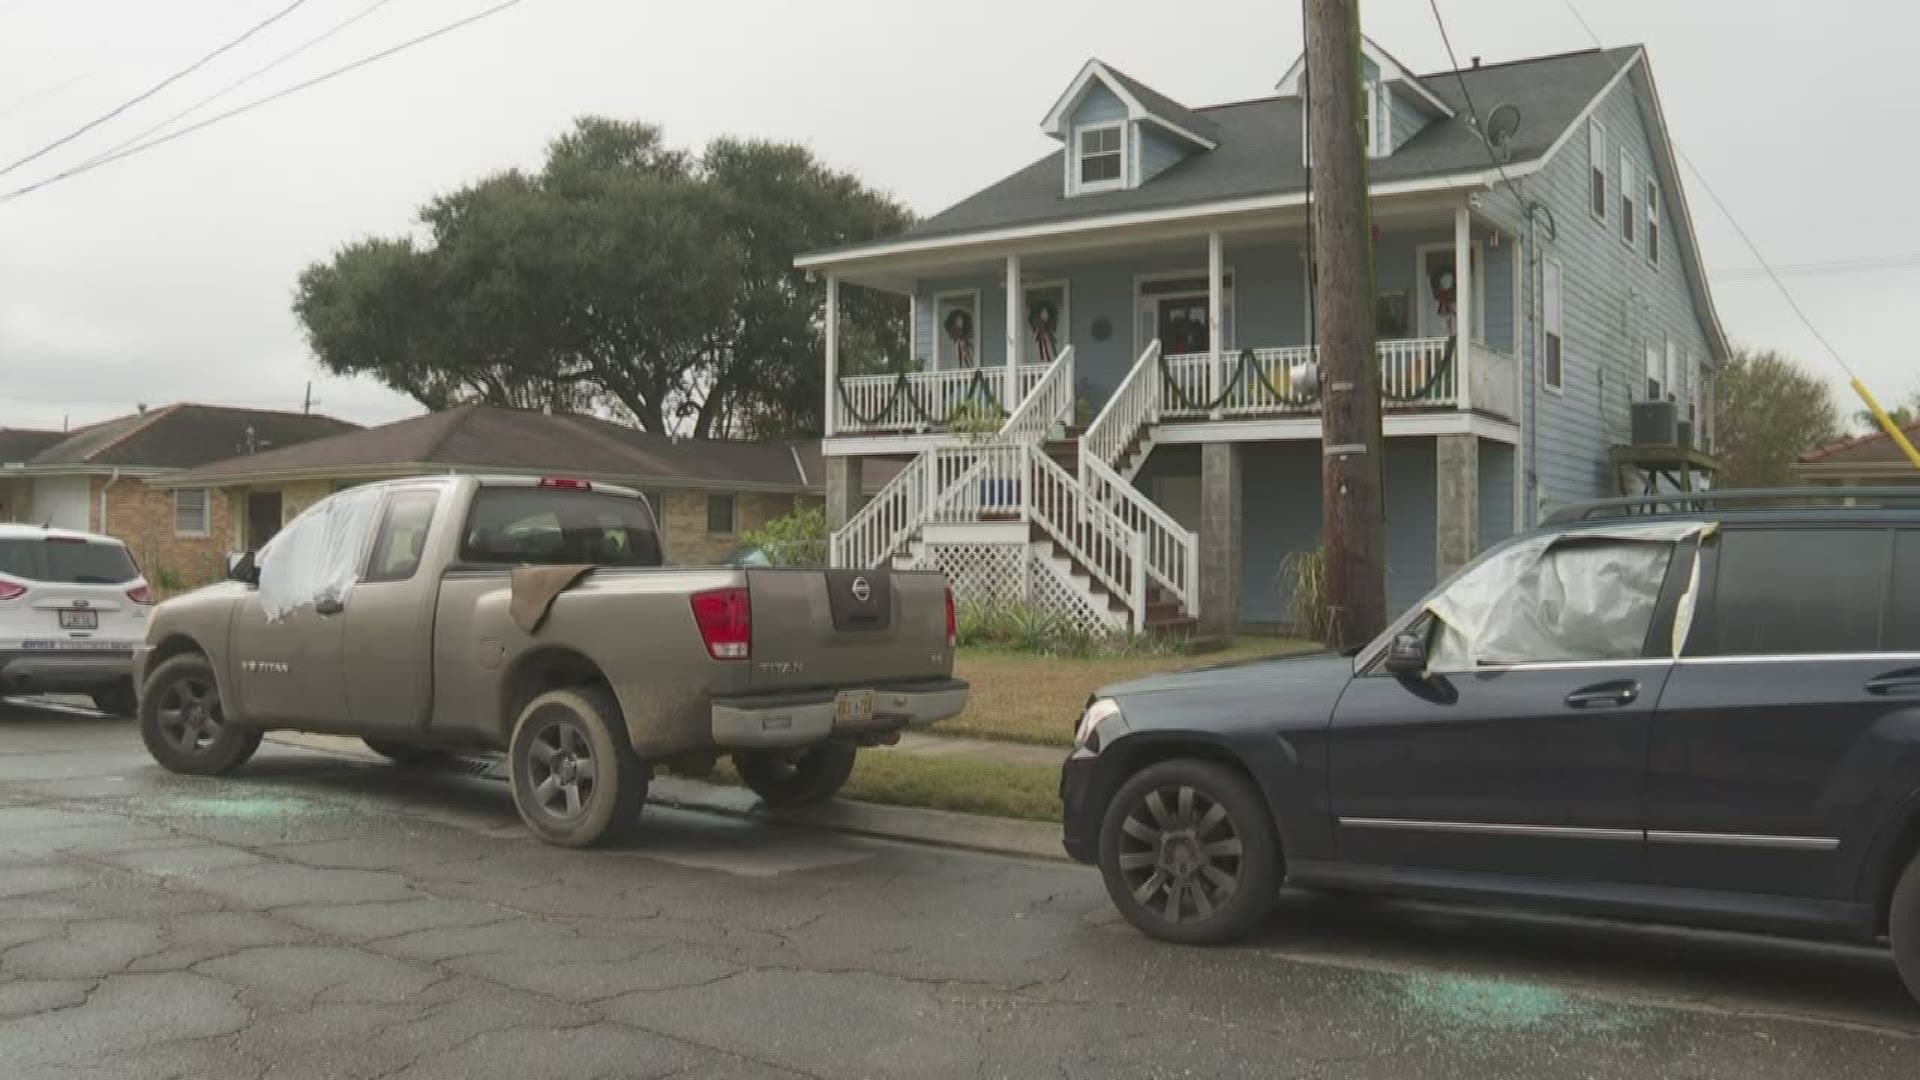 Saturday morning in Lakeview, people woke up to find the shattered glass and busted windows of more than a dozen cars that had been broken into.